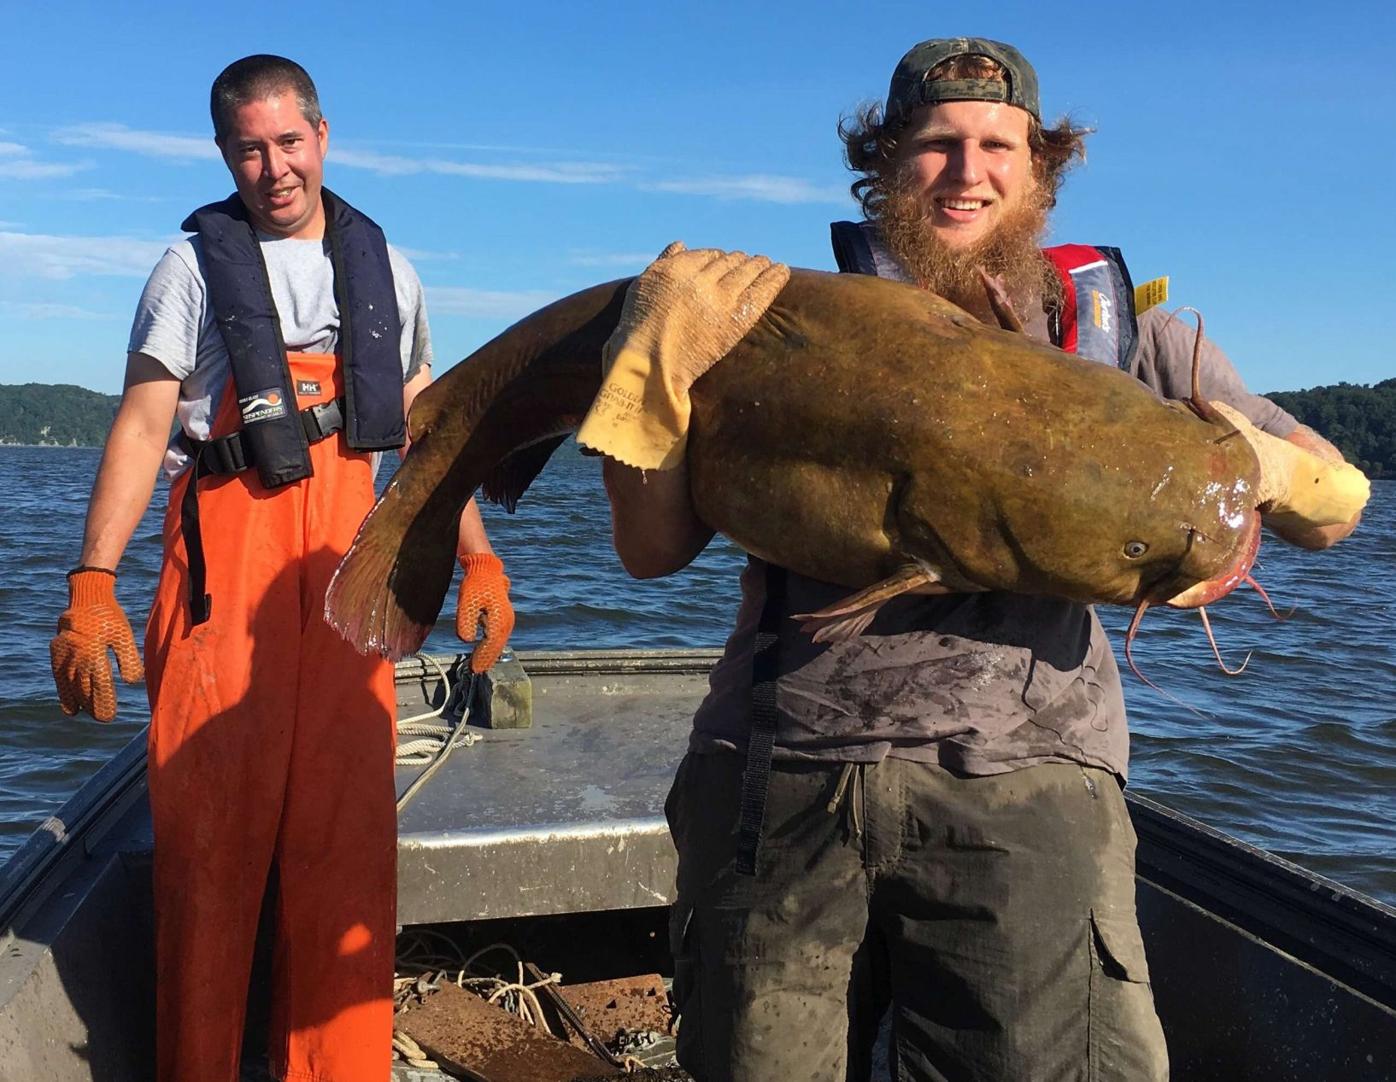 Record-breaking catfish caught on $20 rod from Walmart